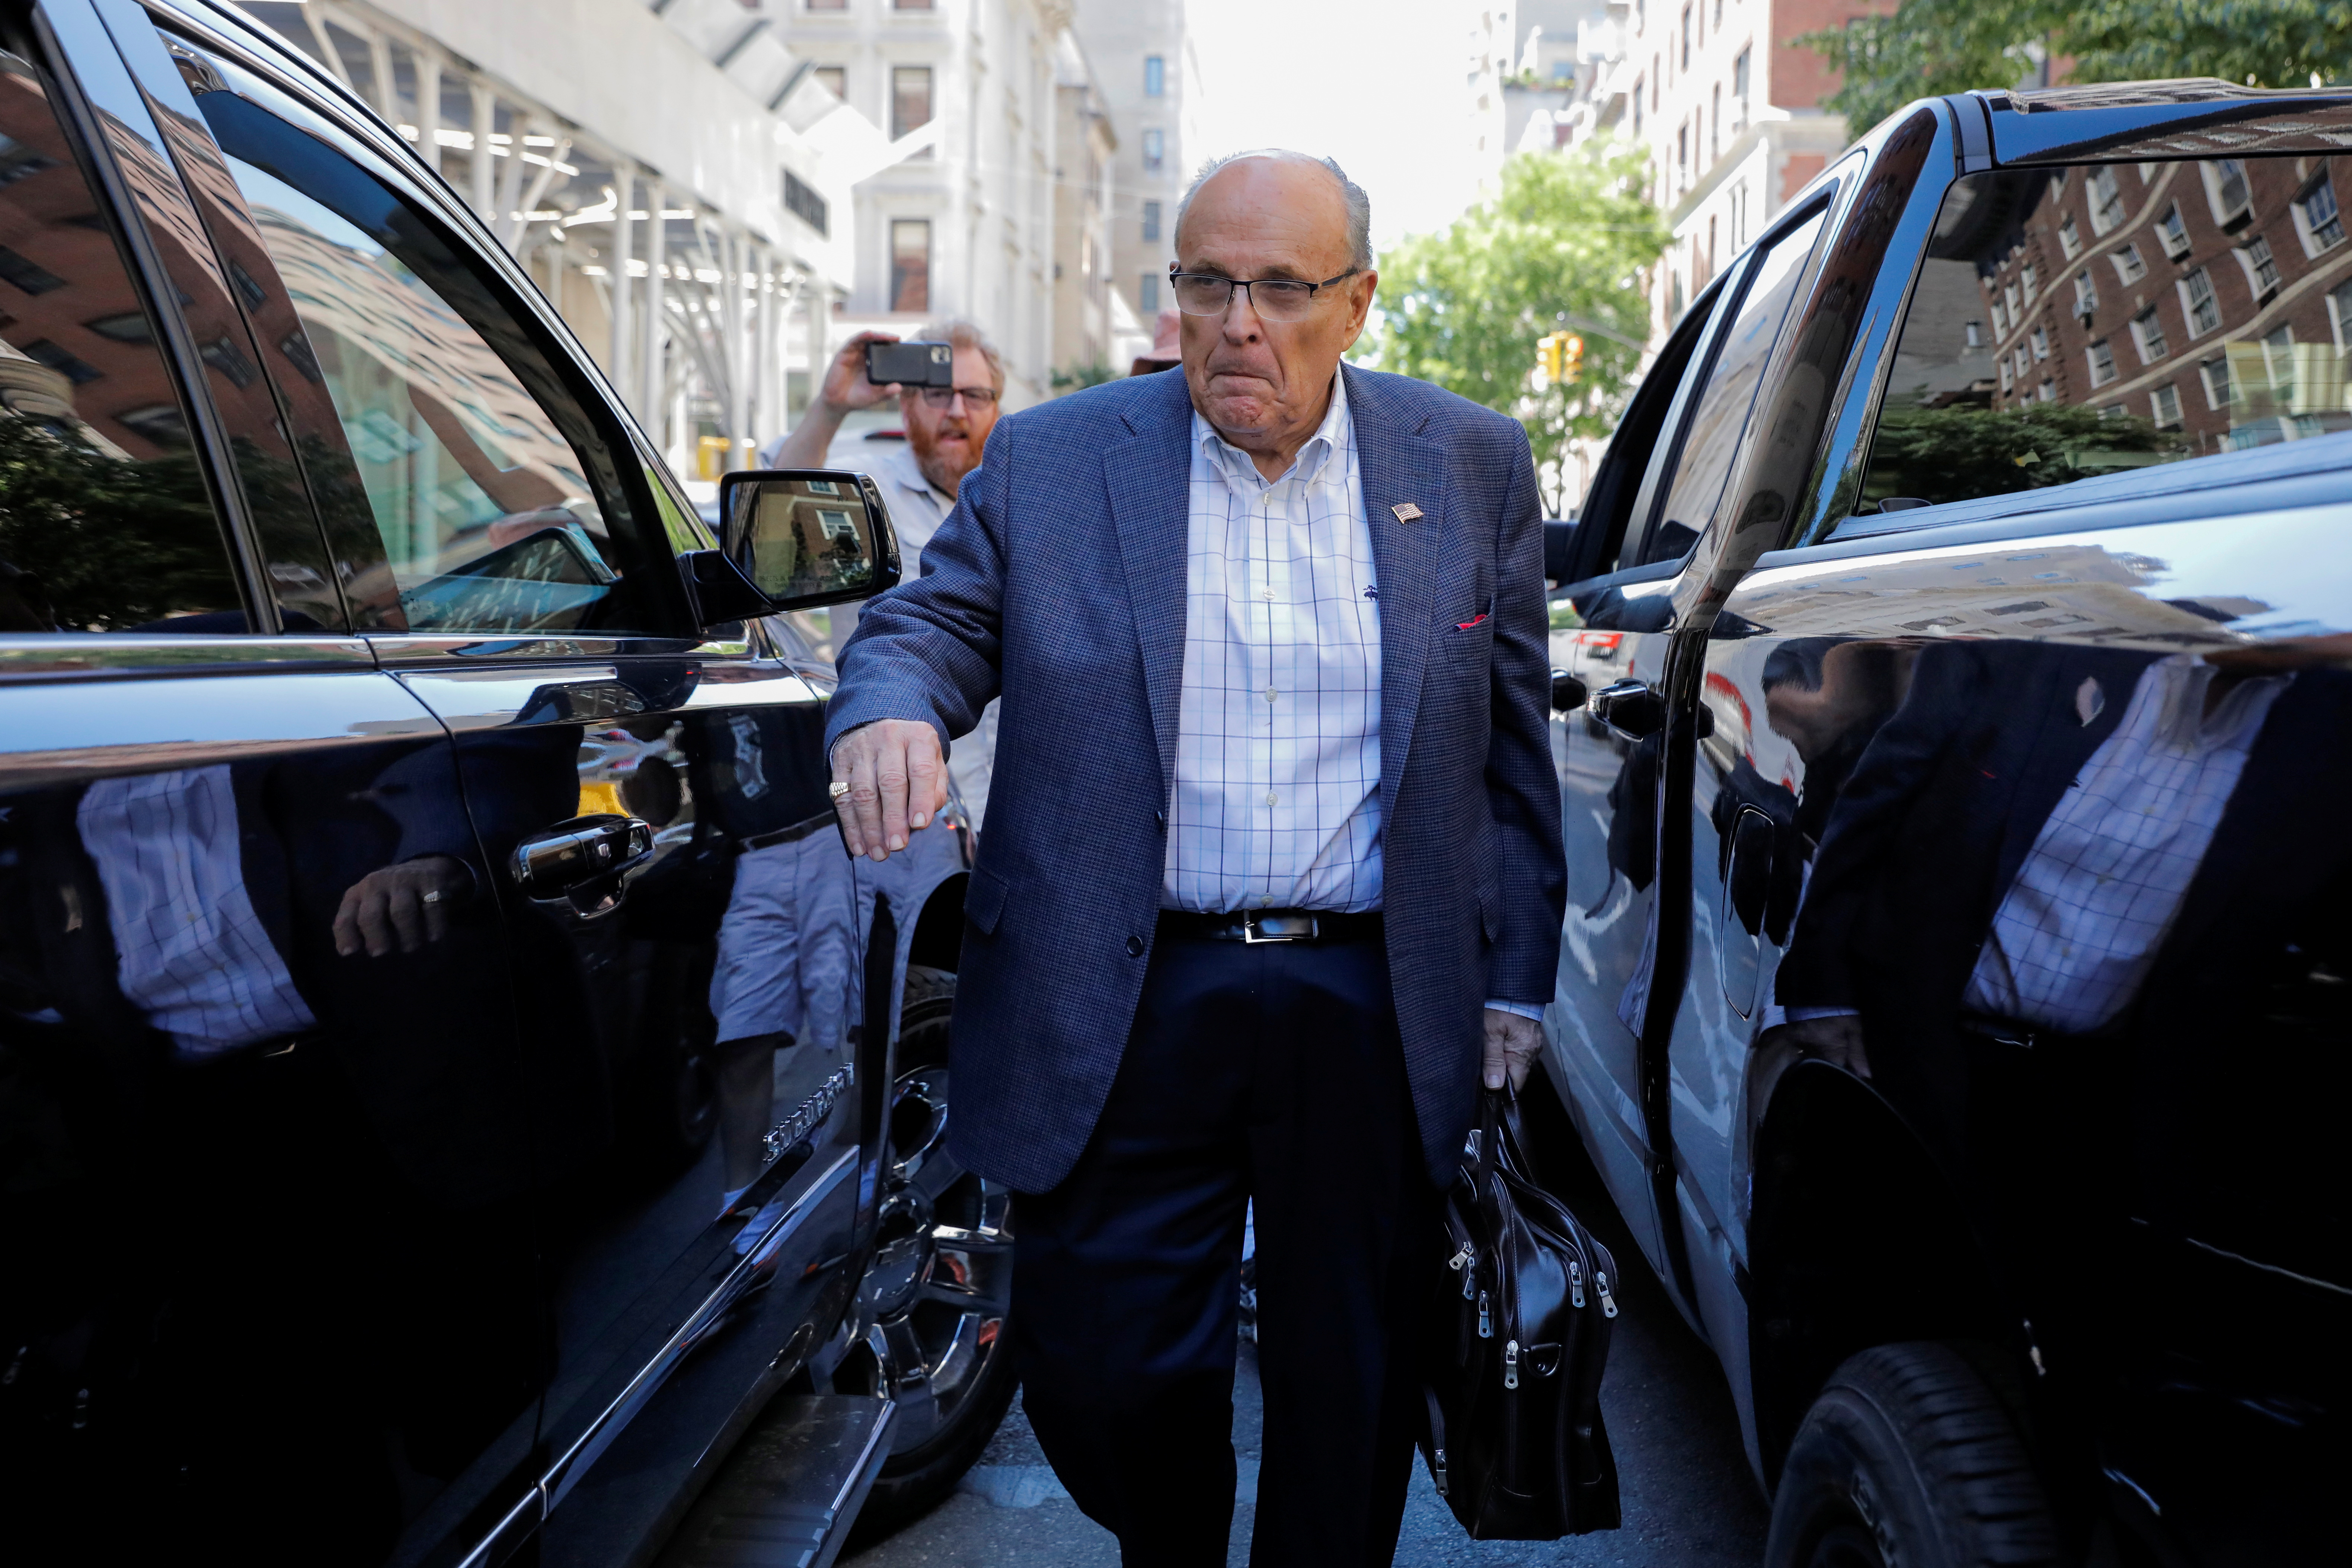 Former New York City Mayor Rudy Giuliani is seen outside his apartment building after his law license was suspended in Manhattan in New York City